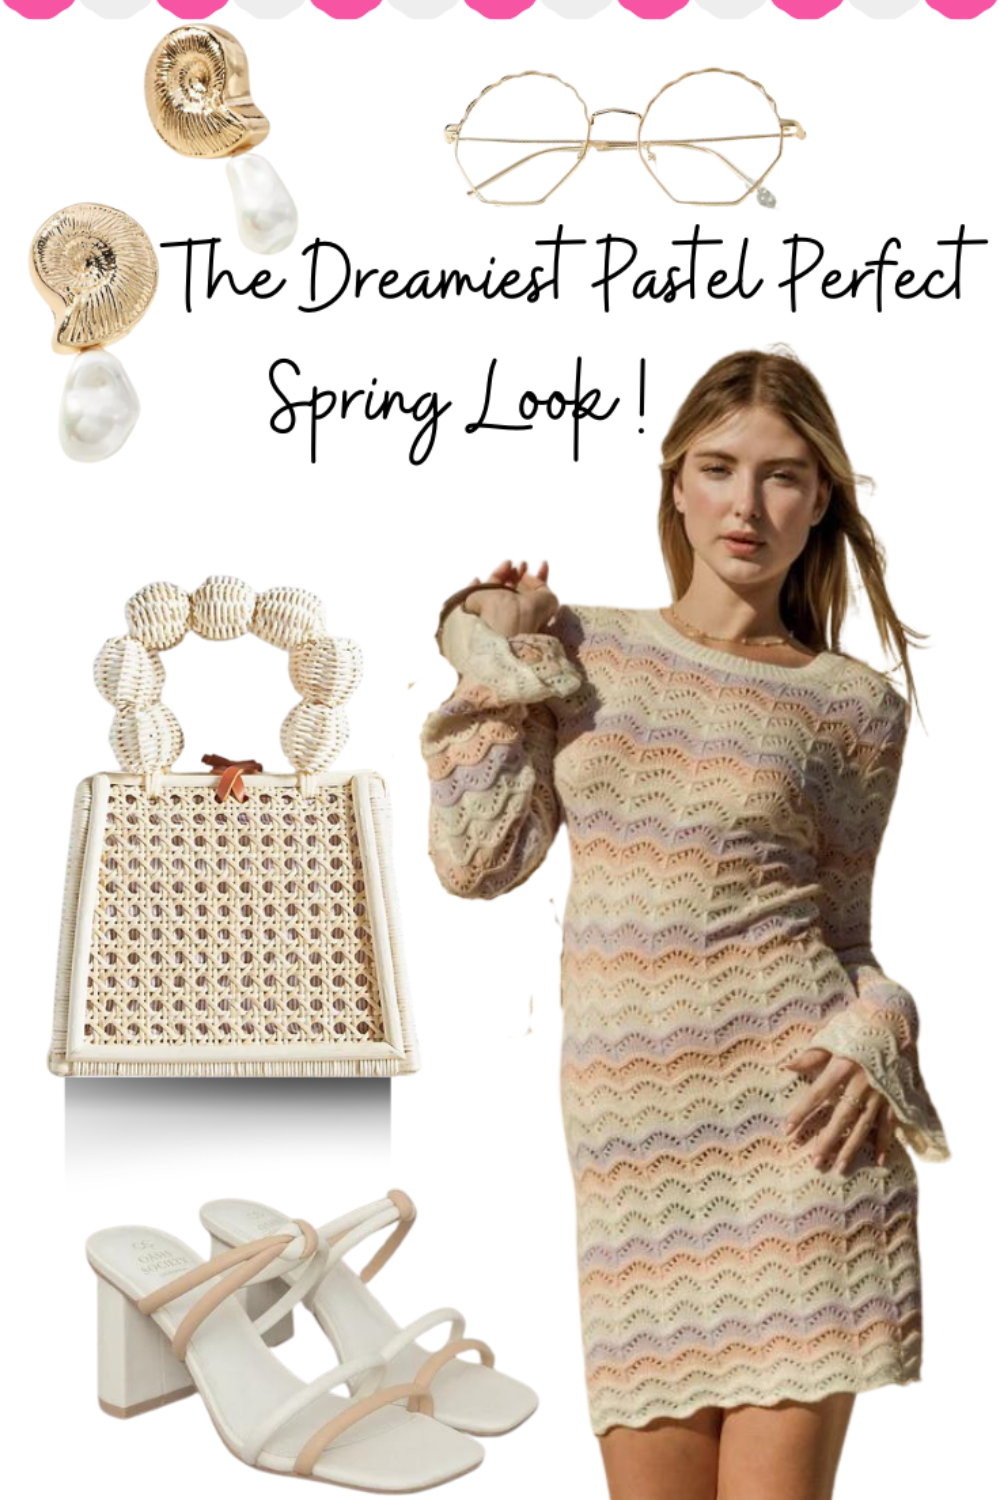 The Dreamiest Pastel Perfect Spring Look & Where to Shop It!